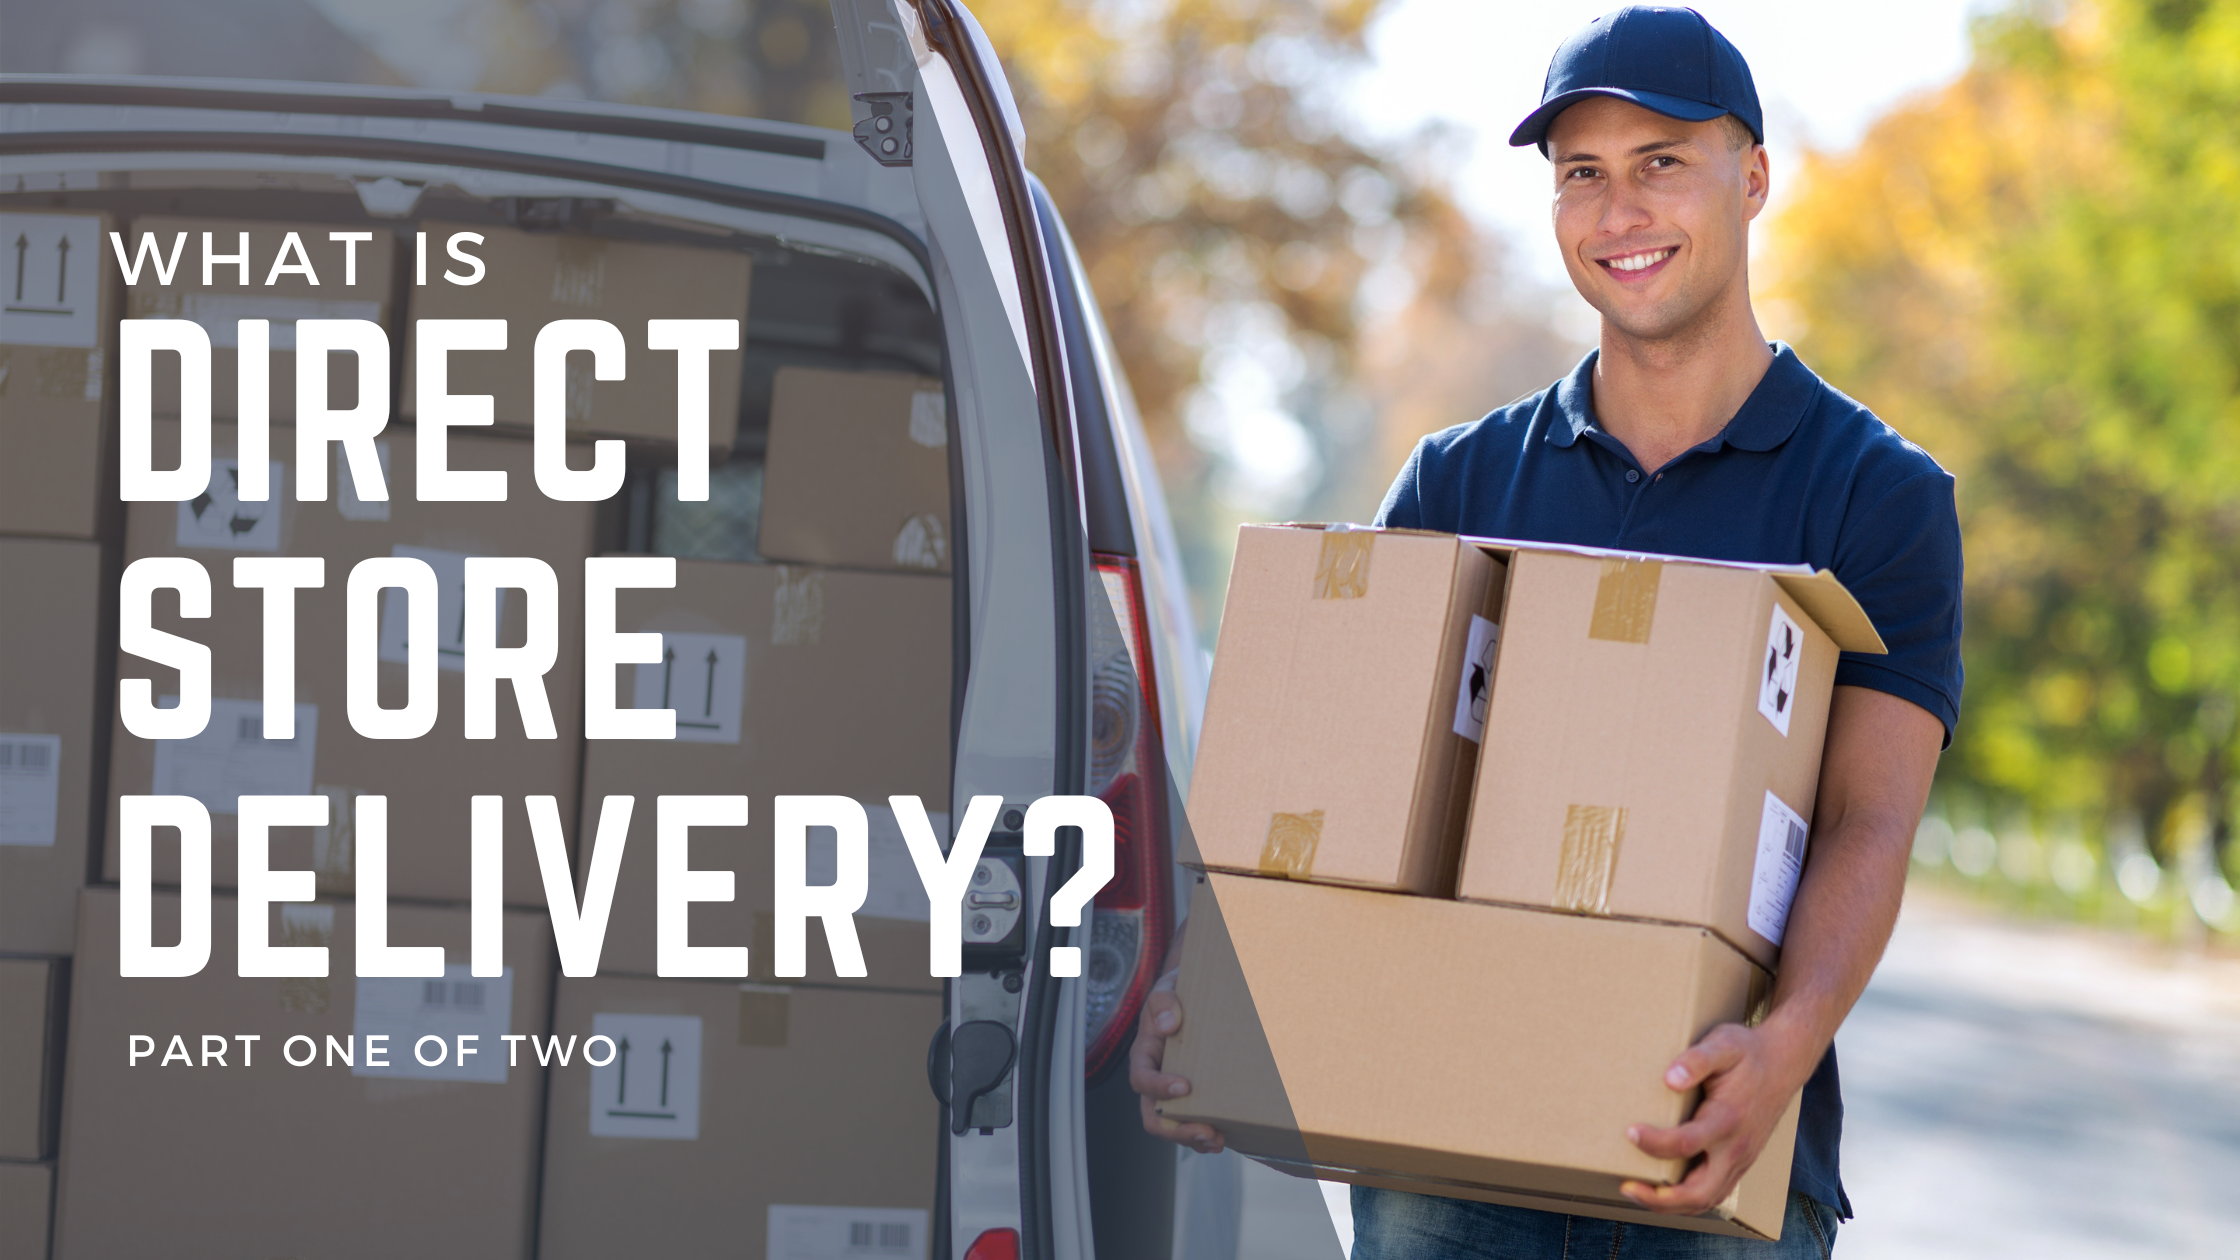 What is direct store delivery? Part one of two